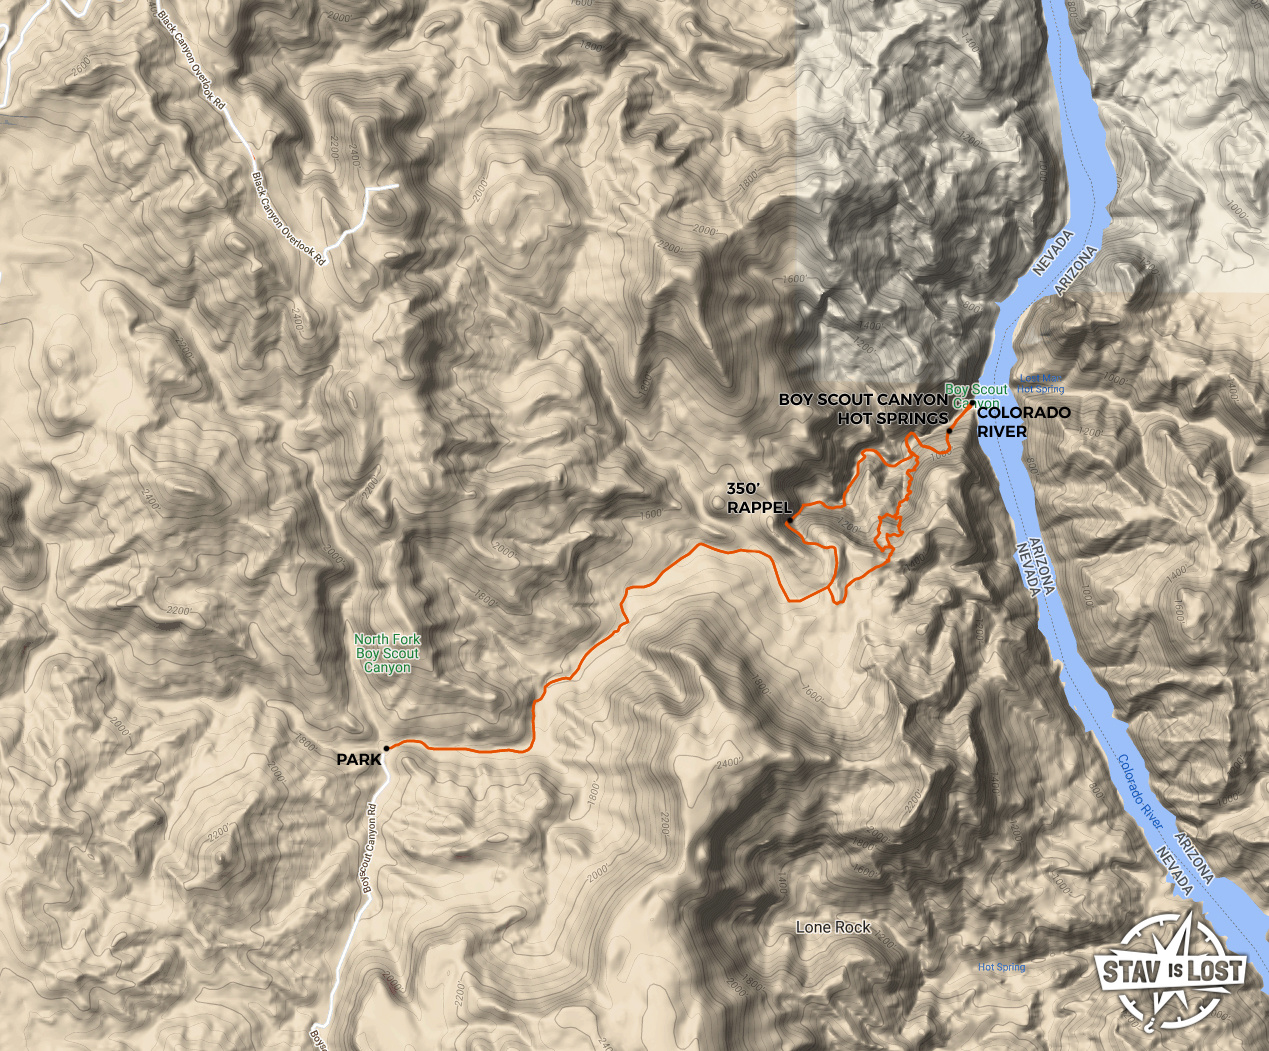 map for Boy Scout Canyon Hot Springs by stav is lost